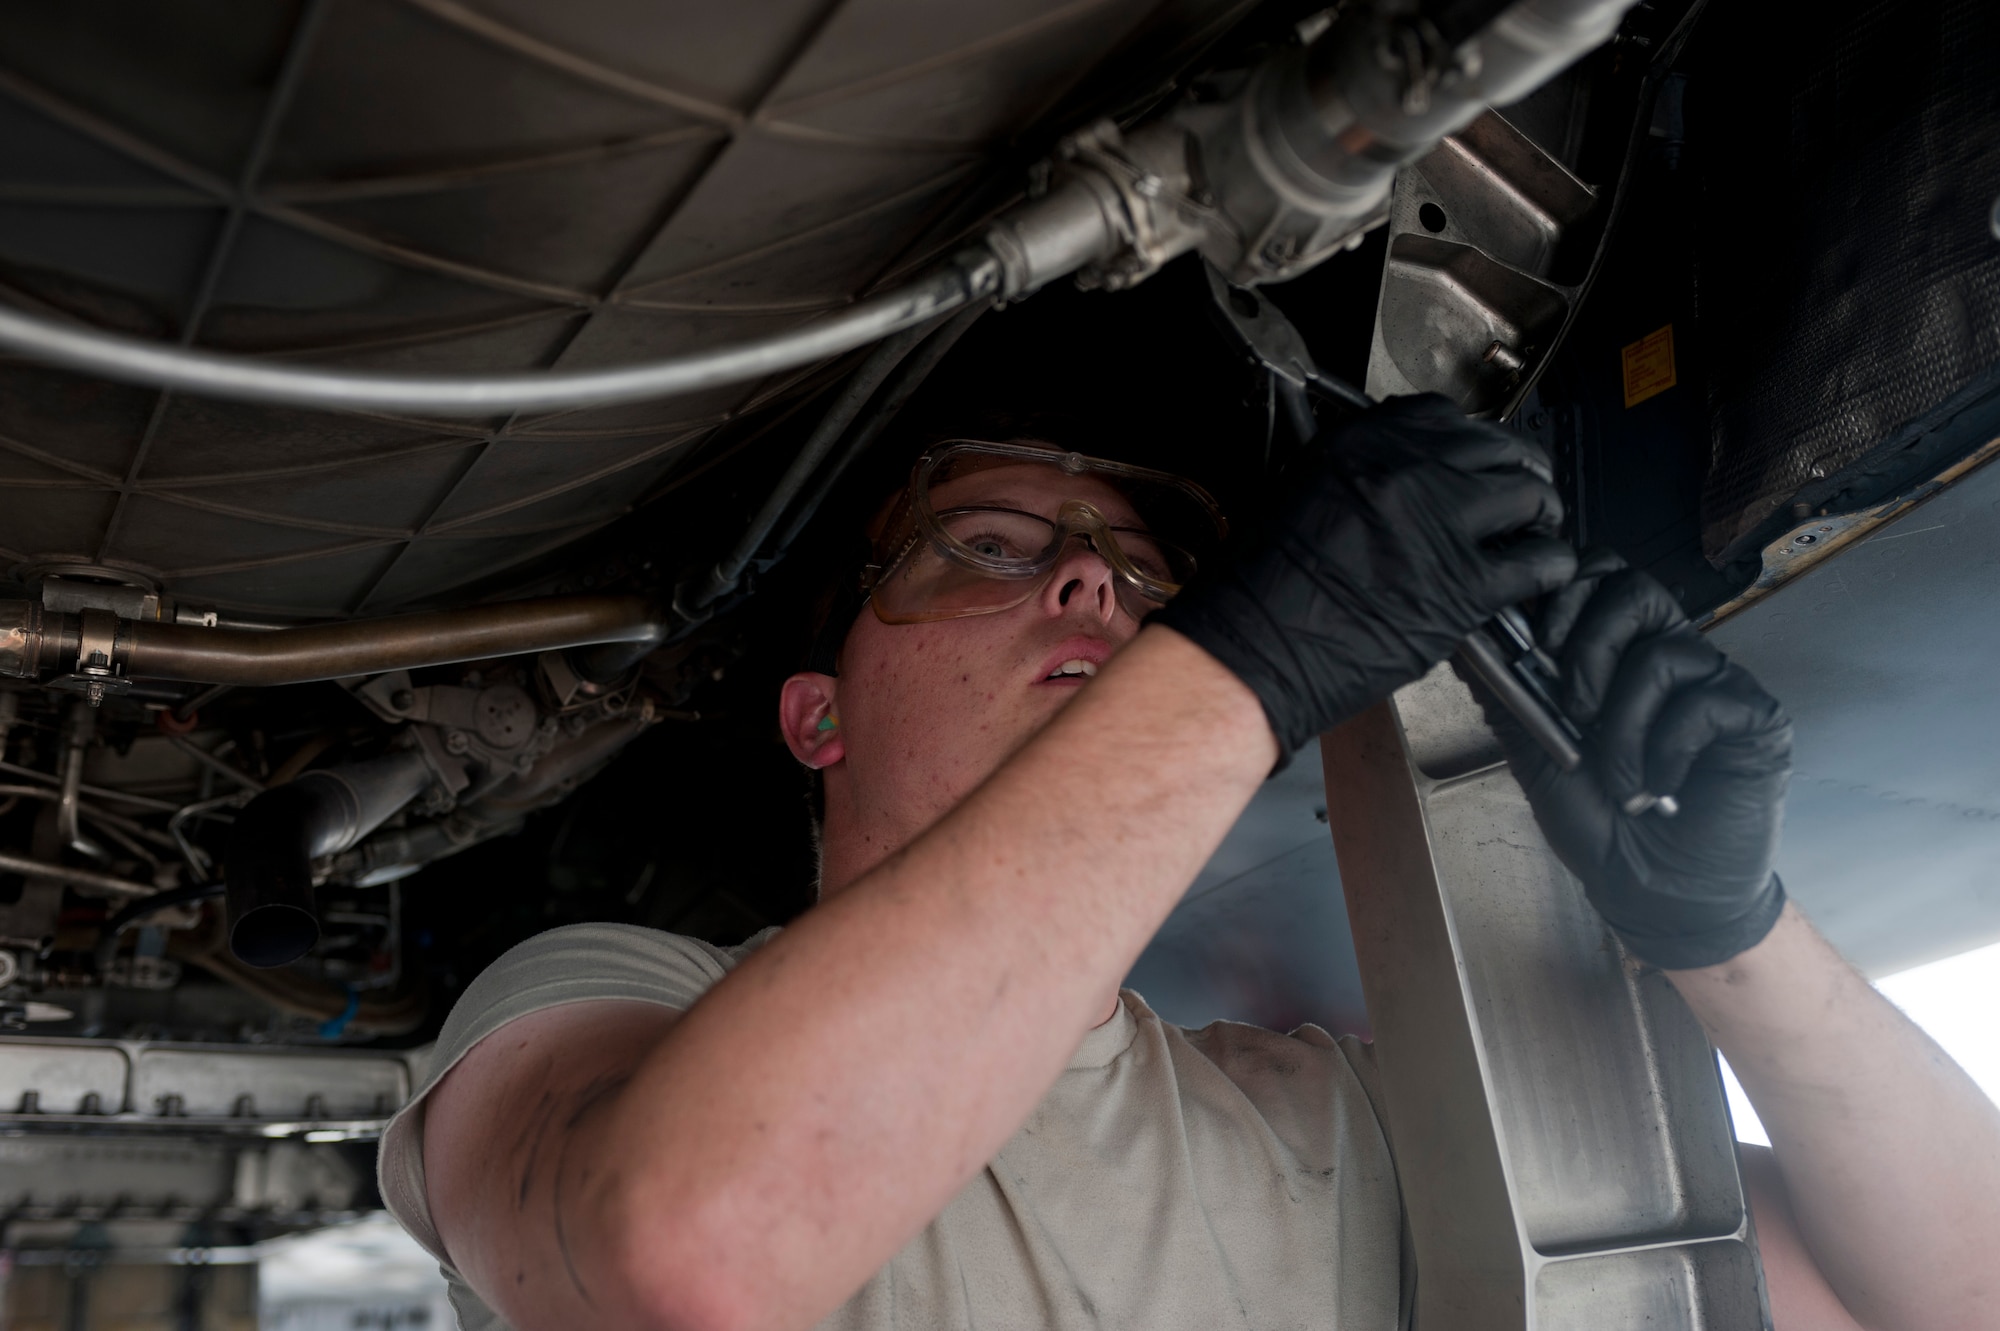 Airman 1st Class Thomas Overley, 757th Aircraft Maintenance Squadron Strike Aircraft Maintenance Unit aerospace propulsion specialist, performs an engine borescope inspection on an F-15E Strike Eagle on the flightline at Nellis Air Force Base, Nev., Aug. 19, 2015. Aerospace propulsions specialists help ensure that the aircraft’s engine is in operational condition. (U.S. Air Force photo by Airman 1st Class Mikaley Towle)